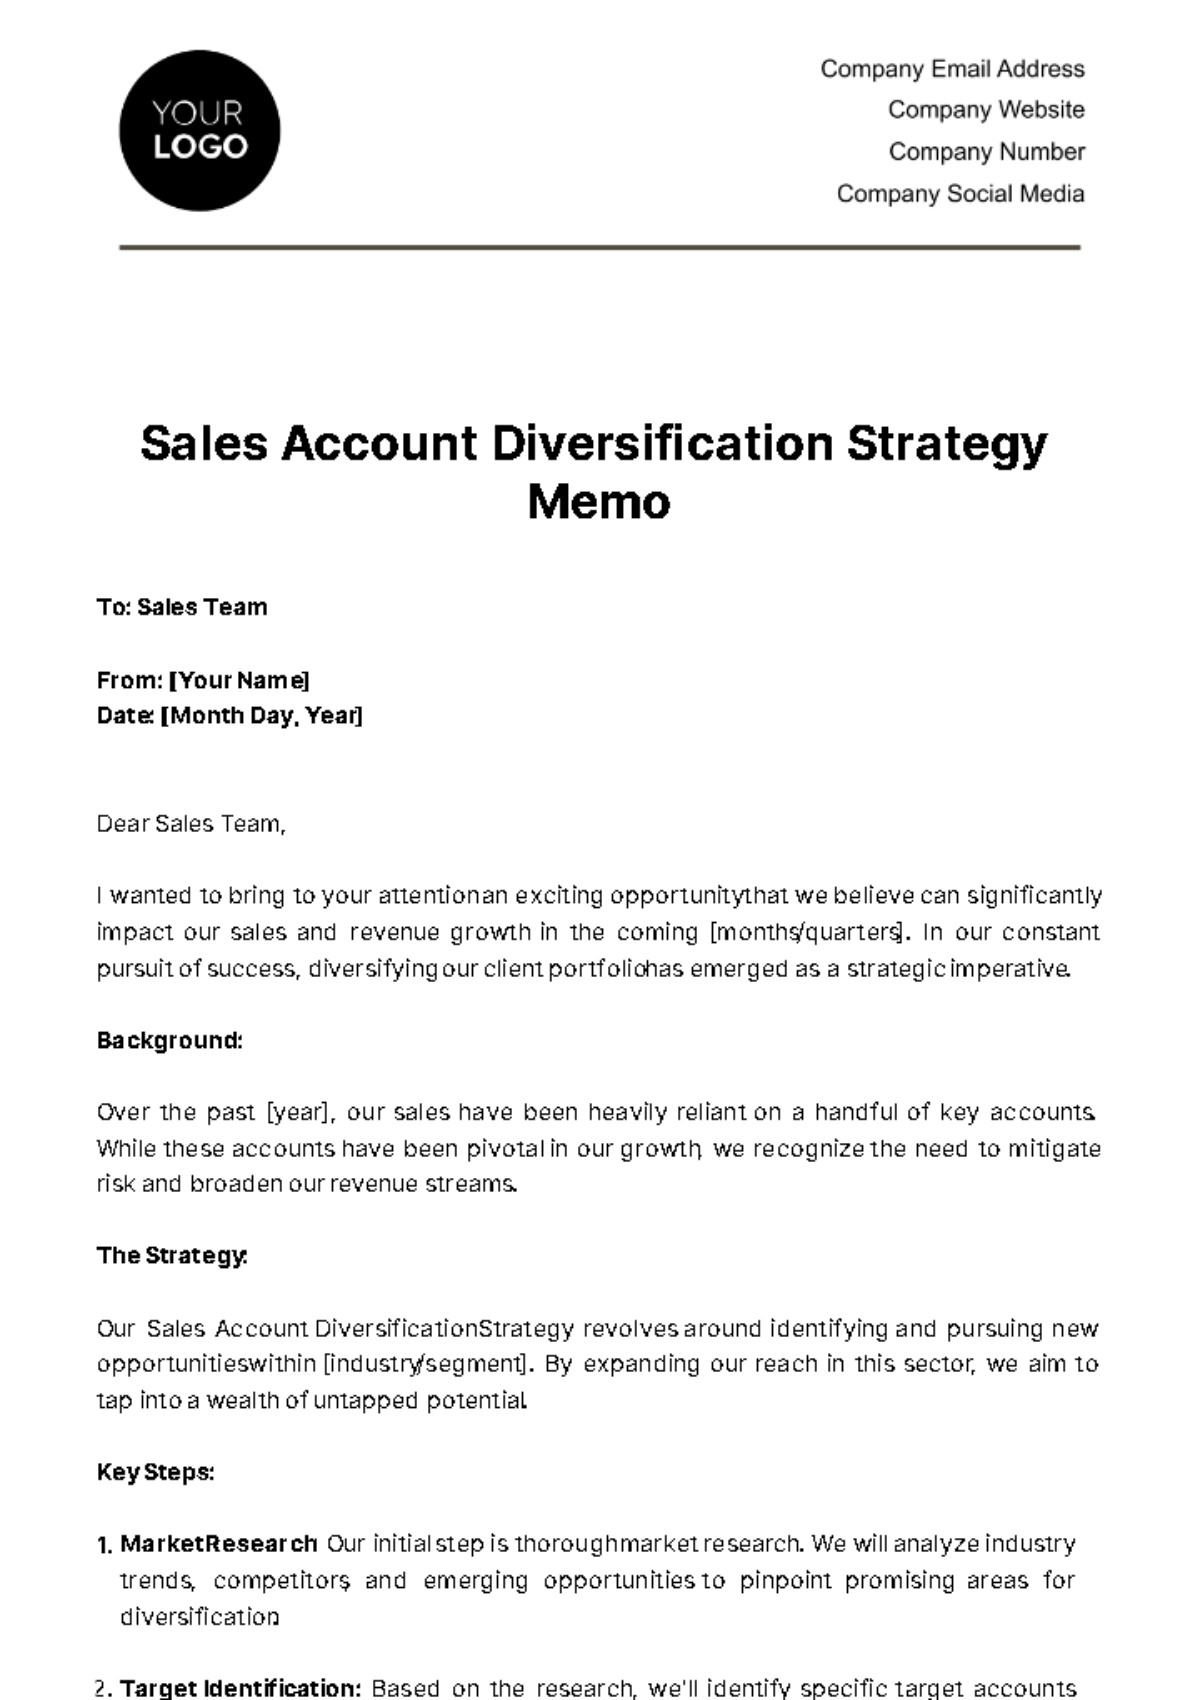 Sales Account Diversification Strategy Memo Template